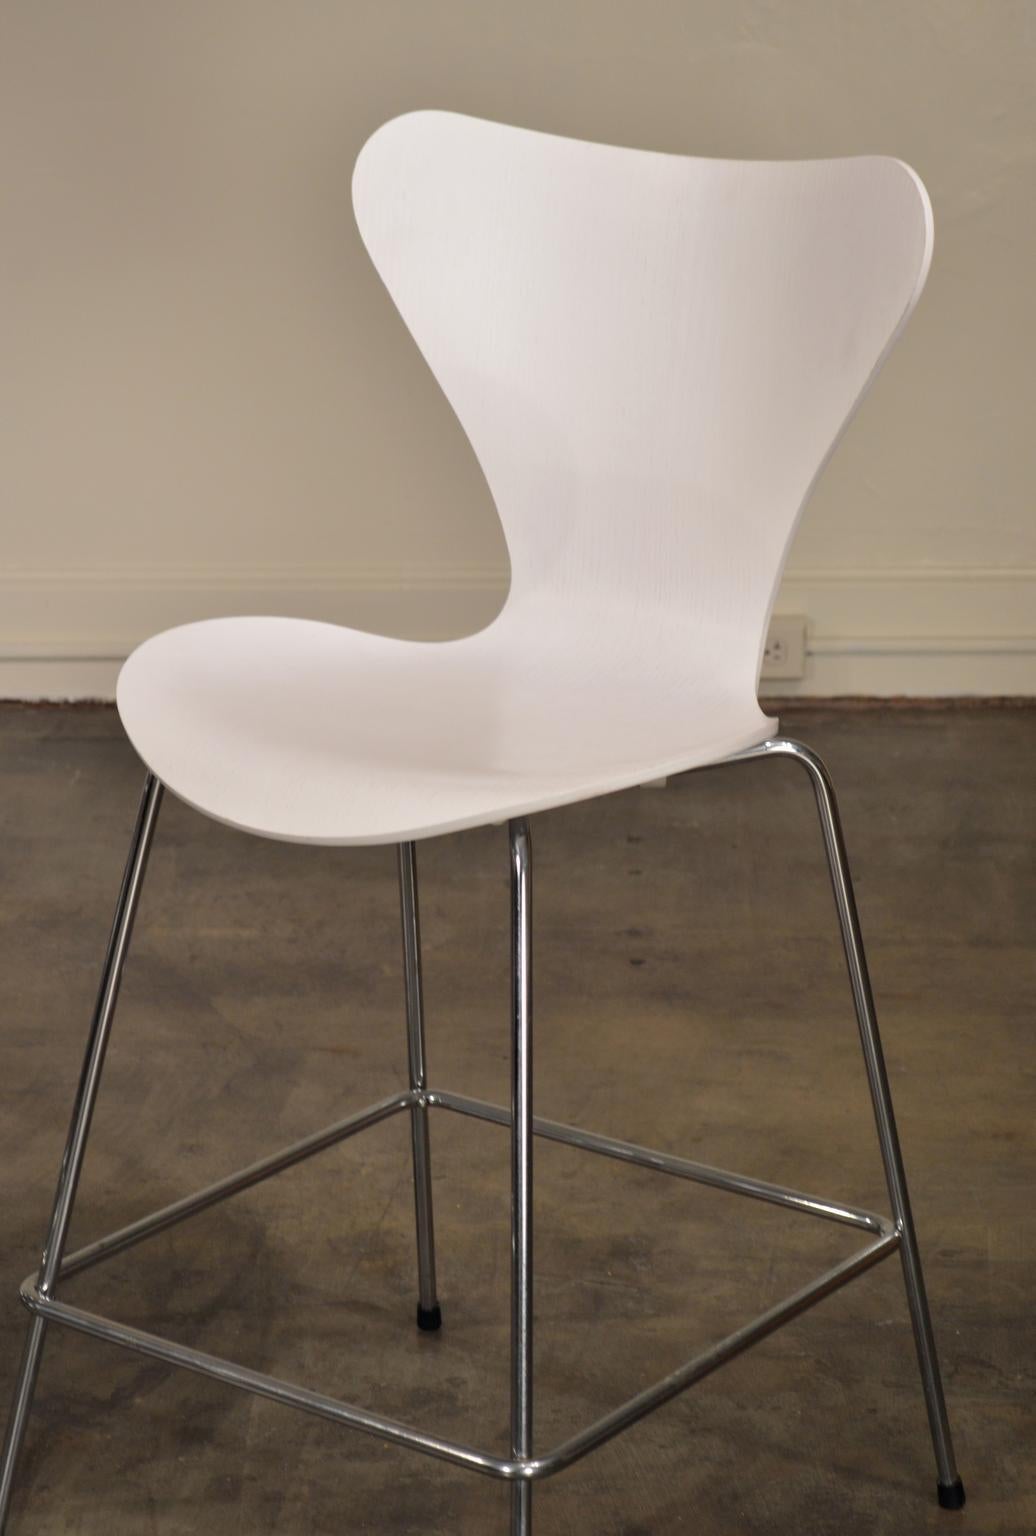 Contemporary Arne Jacobsen Series 7 Bar Stools by Fritz Hansen For Sale